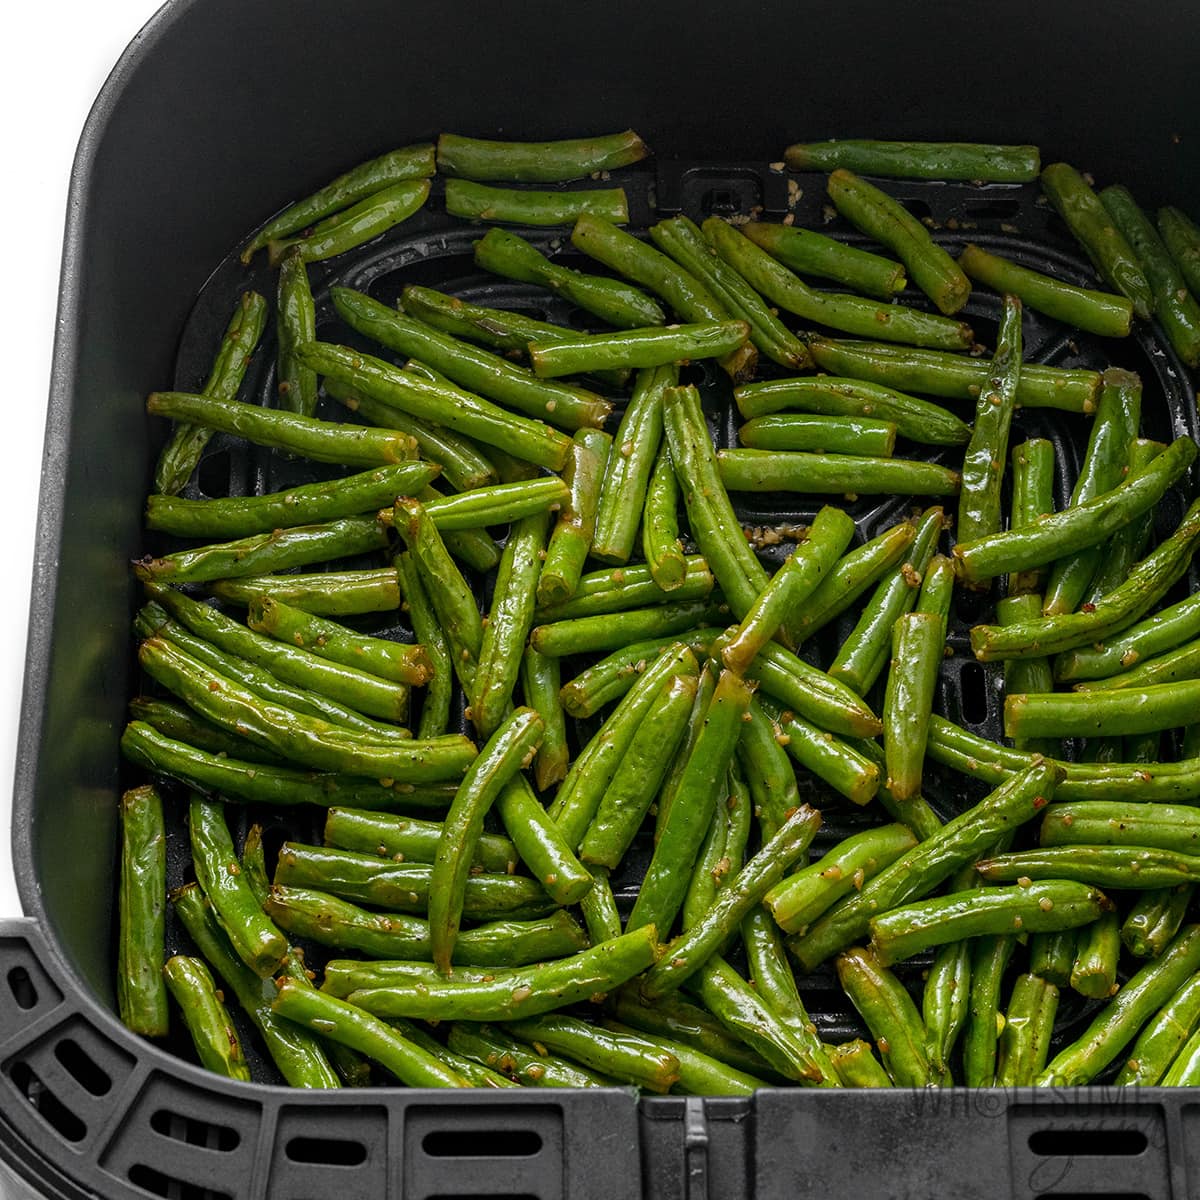 Cooked green beans in the fryer basket.